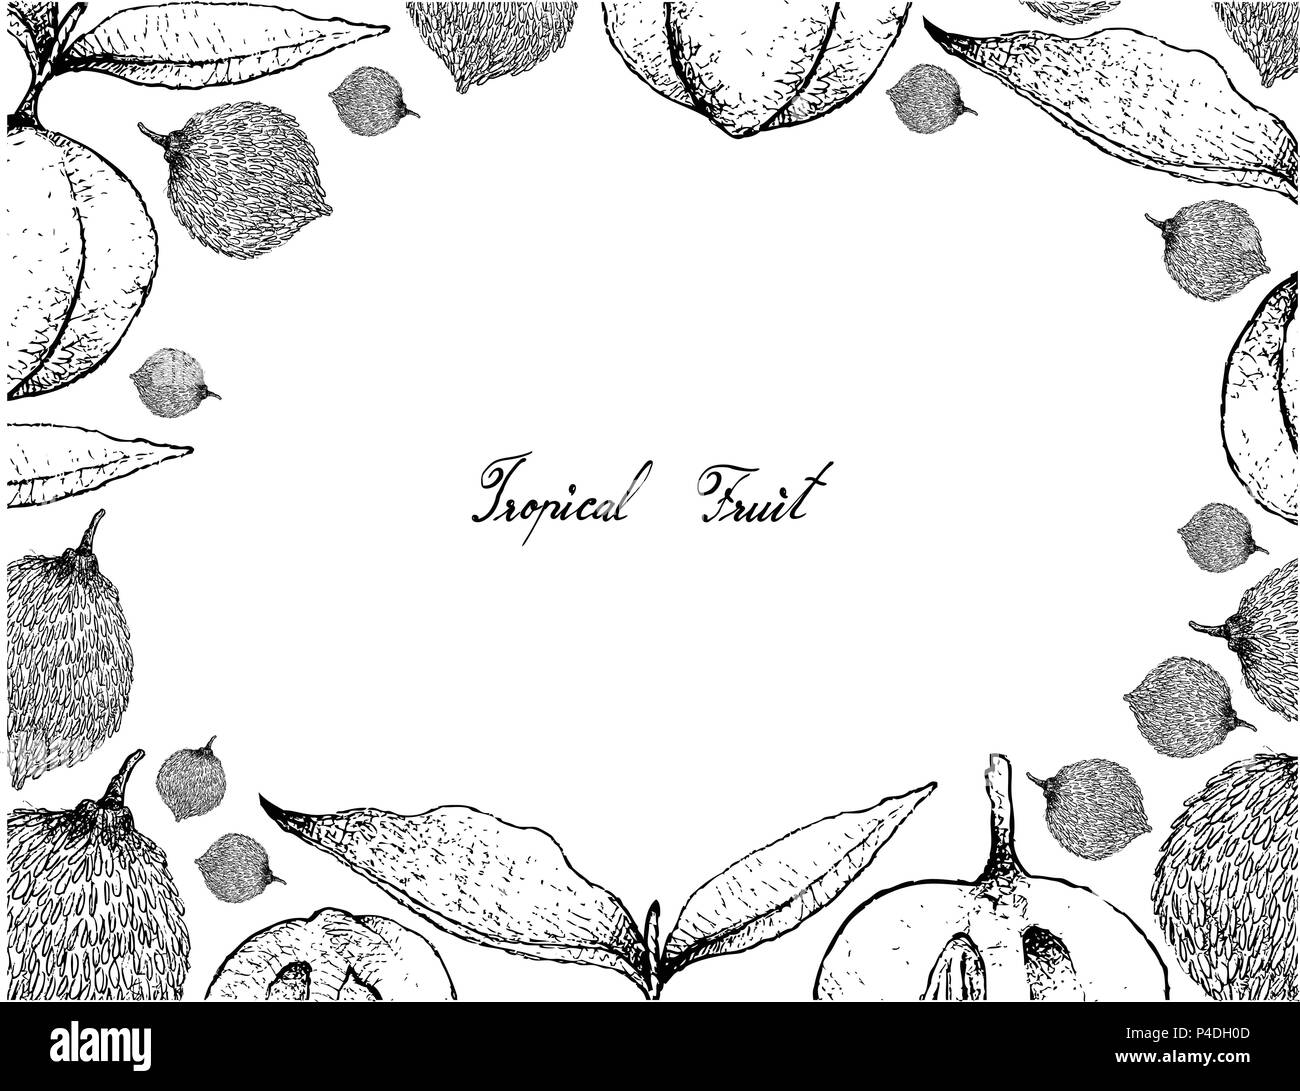 Tropical Fruit, Illustration Frame of Hand Drawn Sketch of Sour Bacuri or Garcinia Acuminata and Diospyros Blancoi or Velvet Apple Fruits Isolated on  Stock Vector